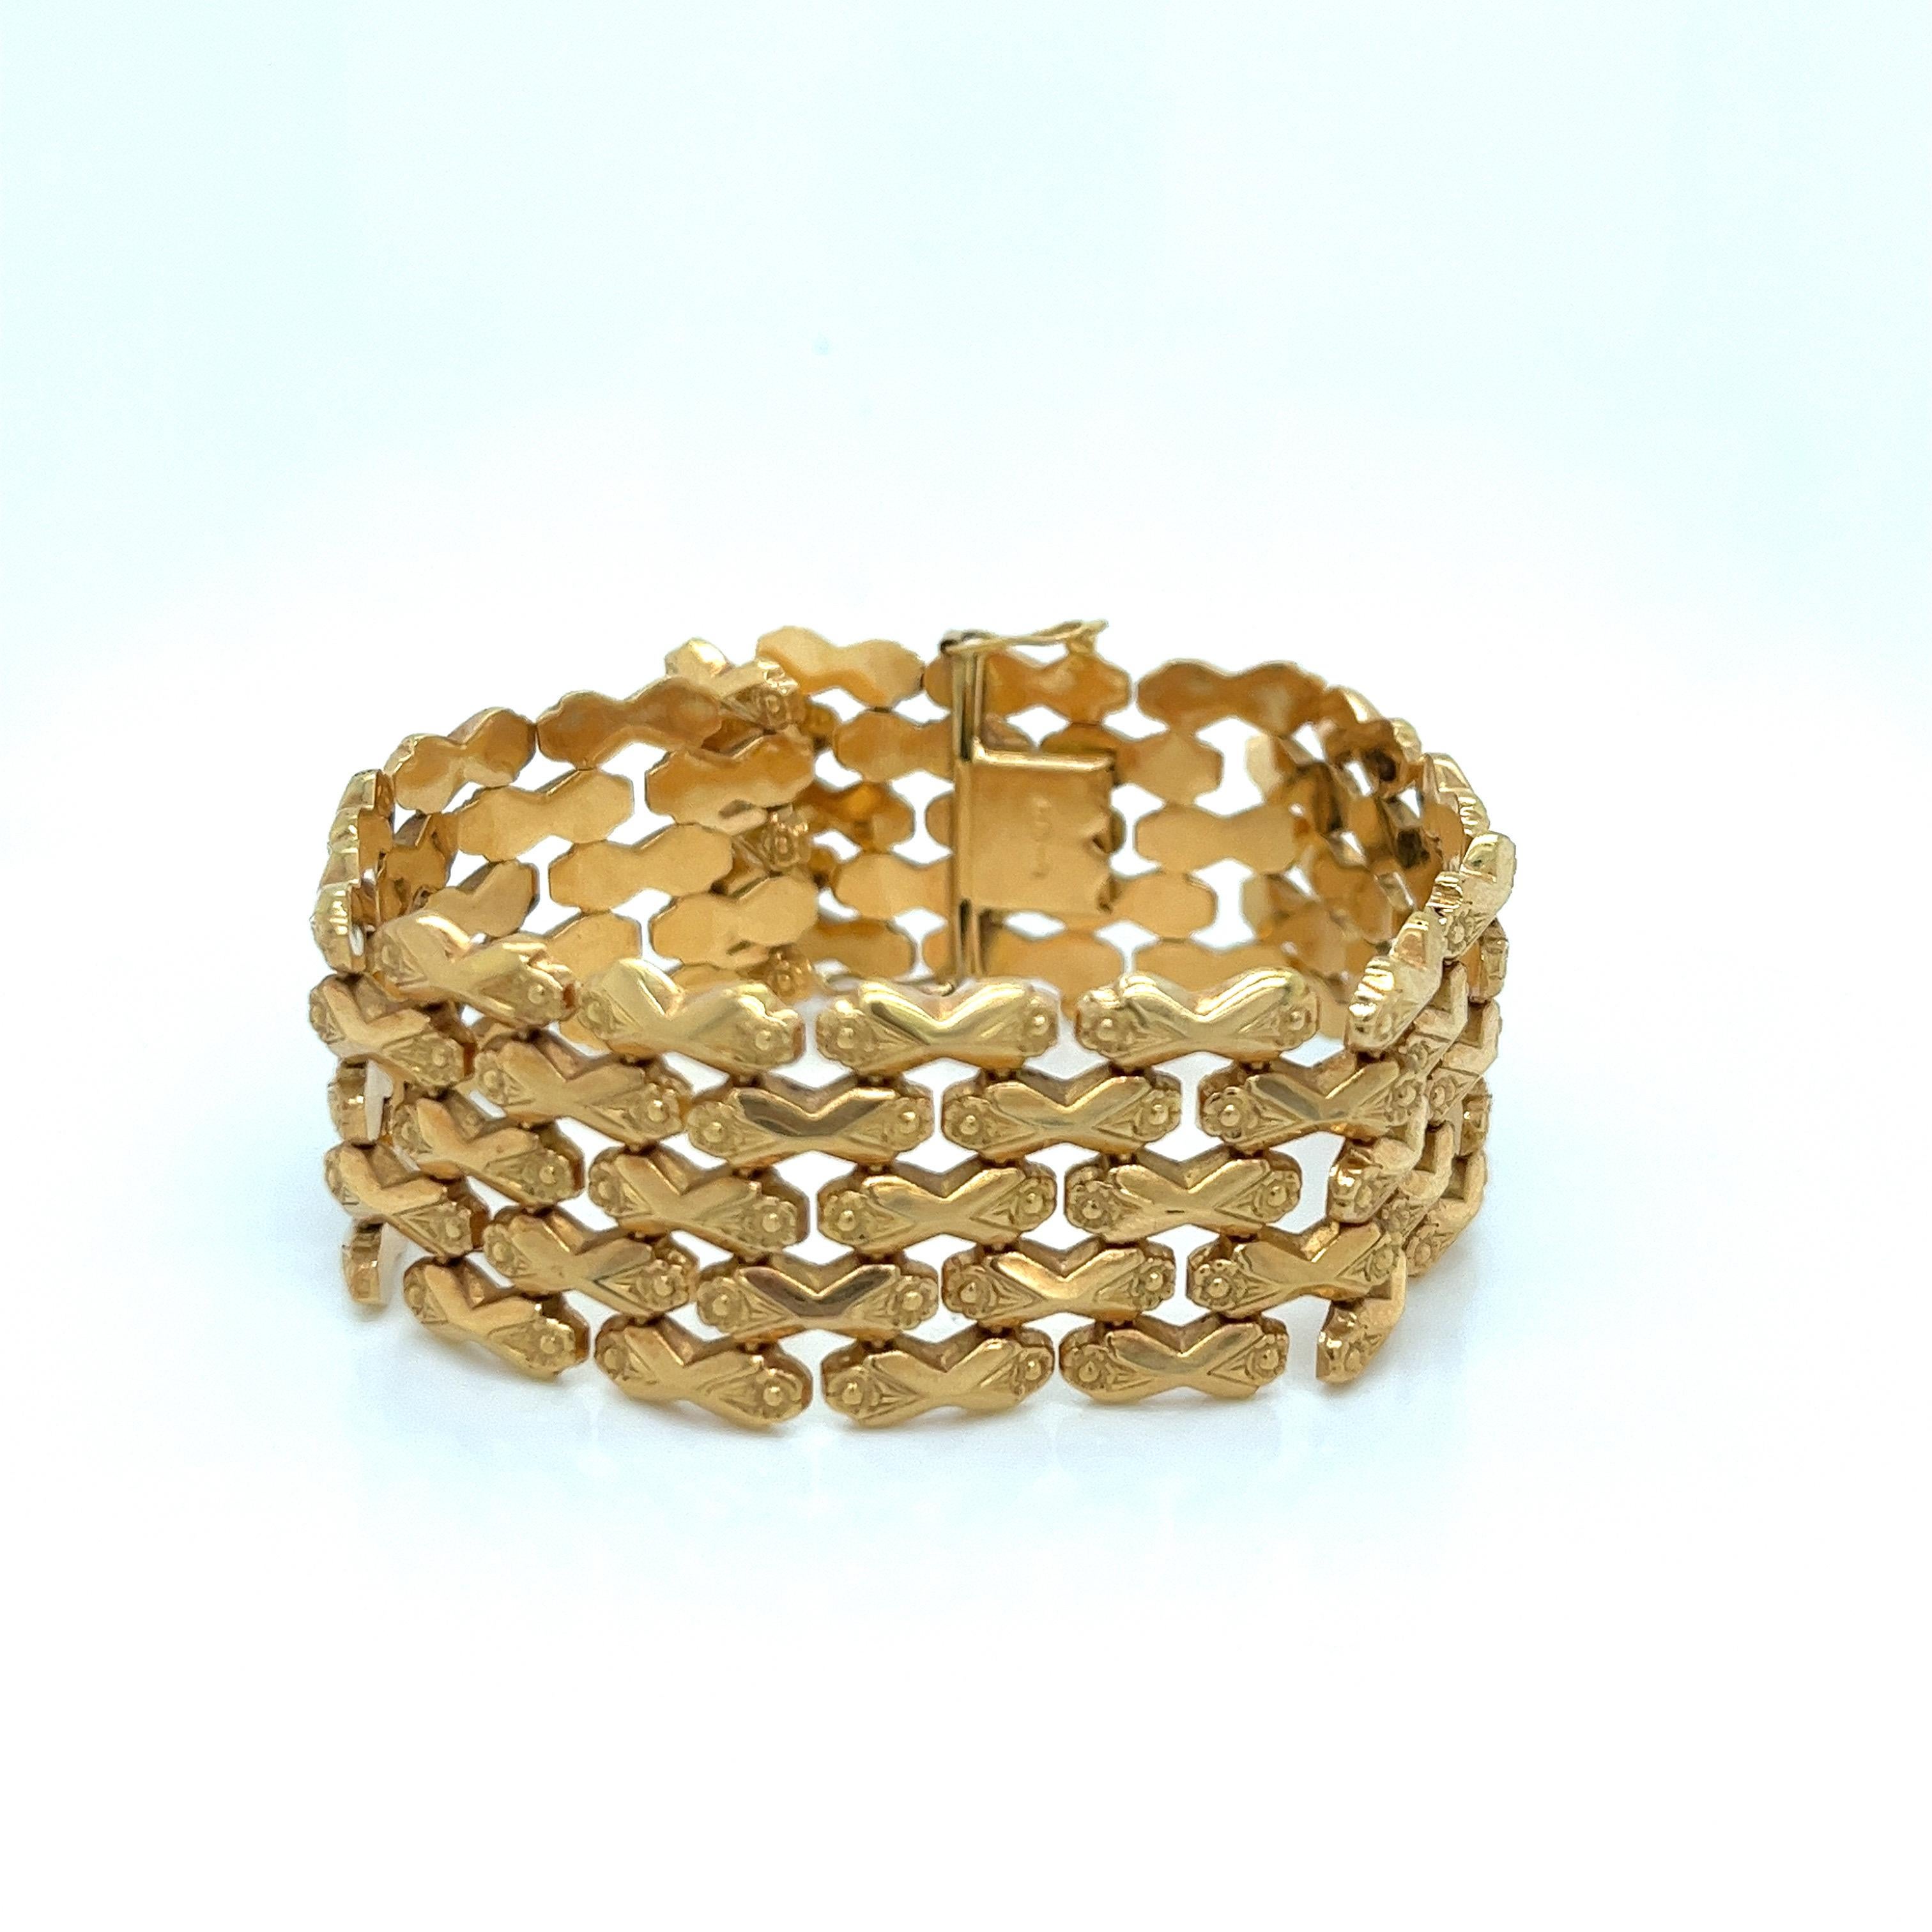 This exquisite vintage bracelet from the 1940s-1950s era showcases the artistry and craftsmanship of its time. Crafted in luxurious 18k yellow gold, verified by the 750 stamp, the design features a striking 5-row wide link pattern adorned with